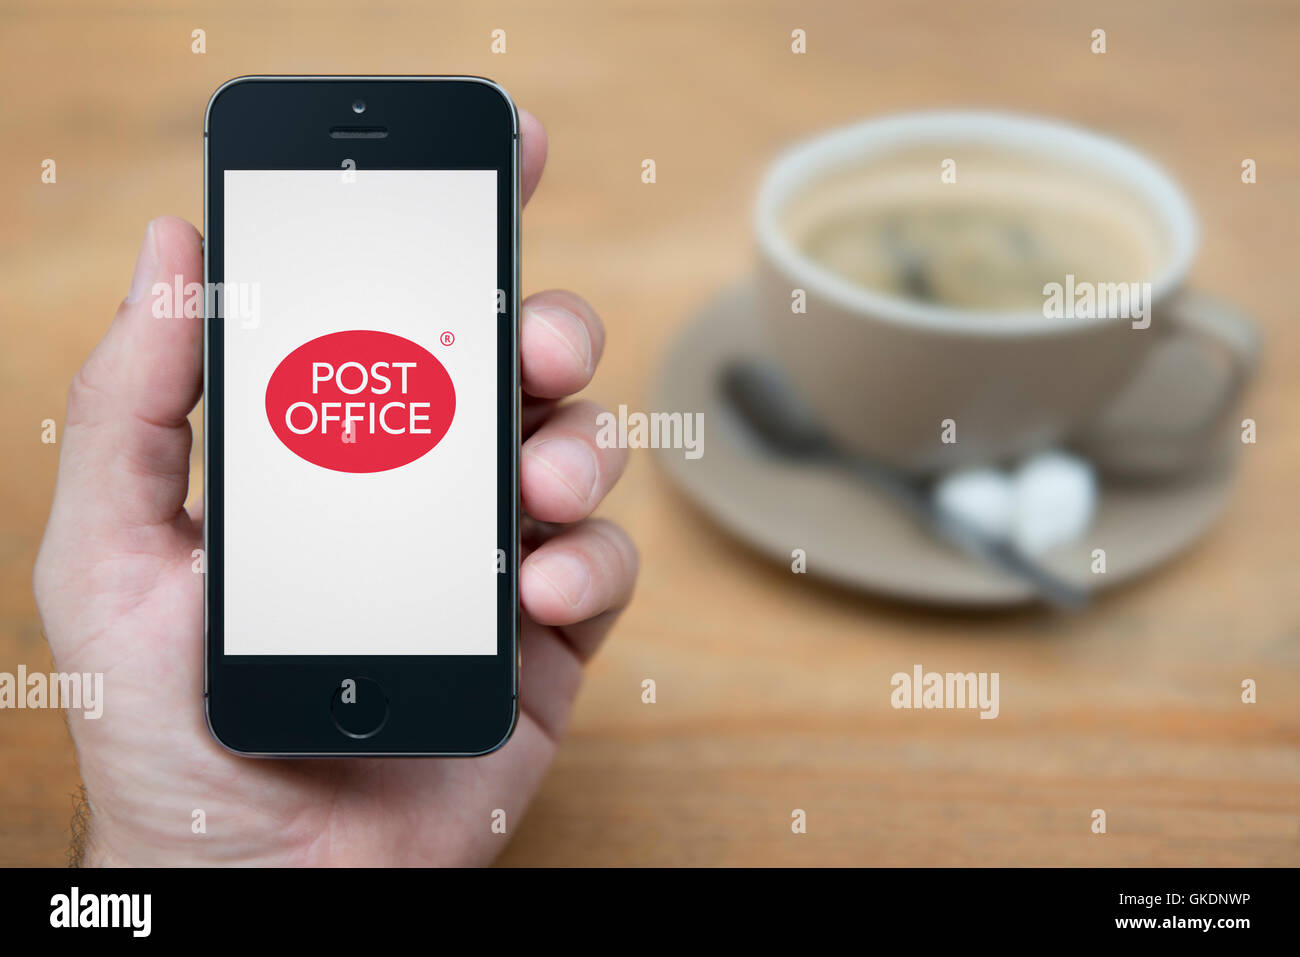 A man looks at his iPhone which displays the Post Office logo, while sat with a cup of coffee (Editorial use only). Stock Photo